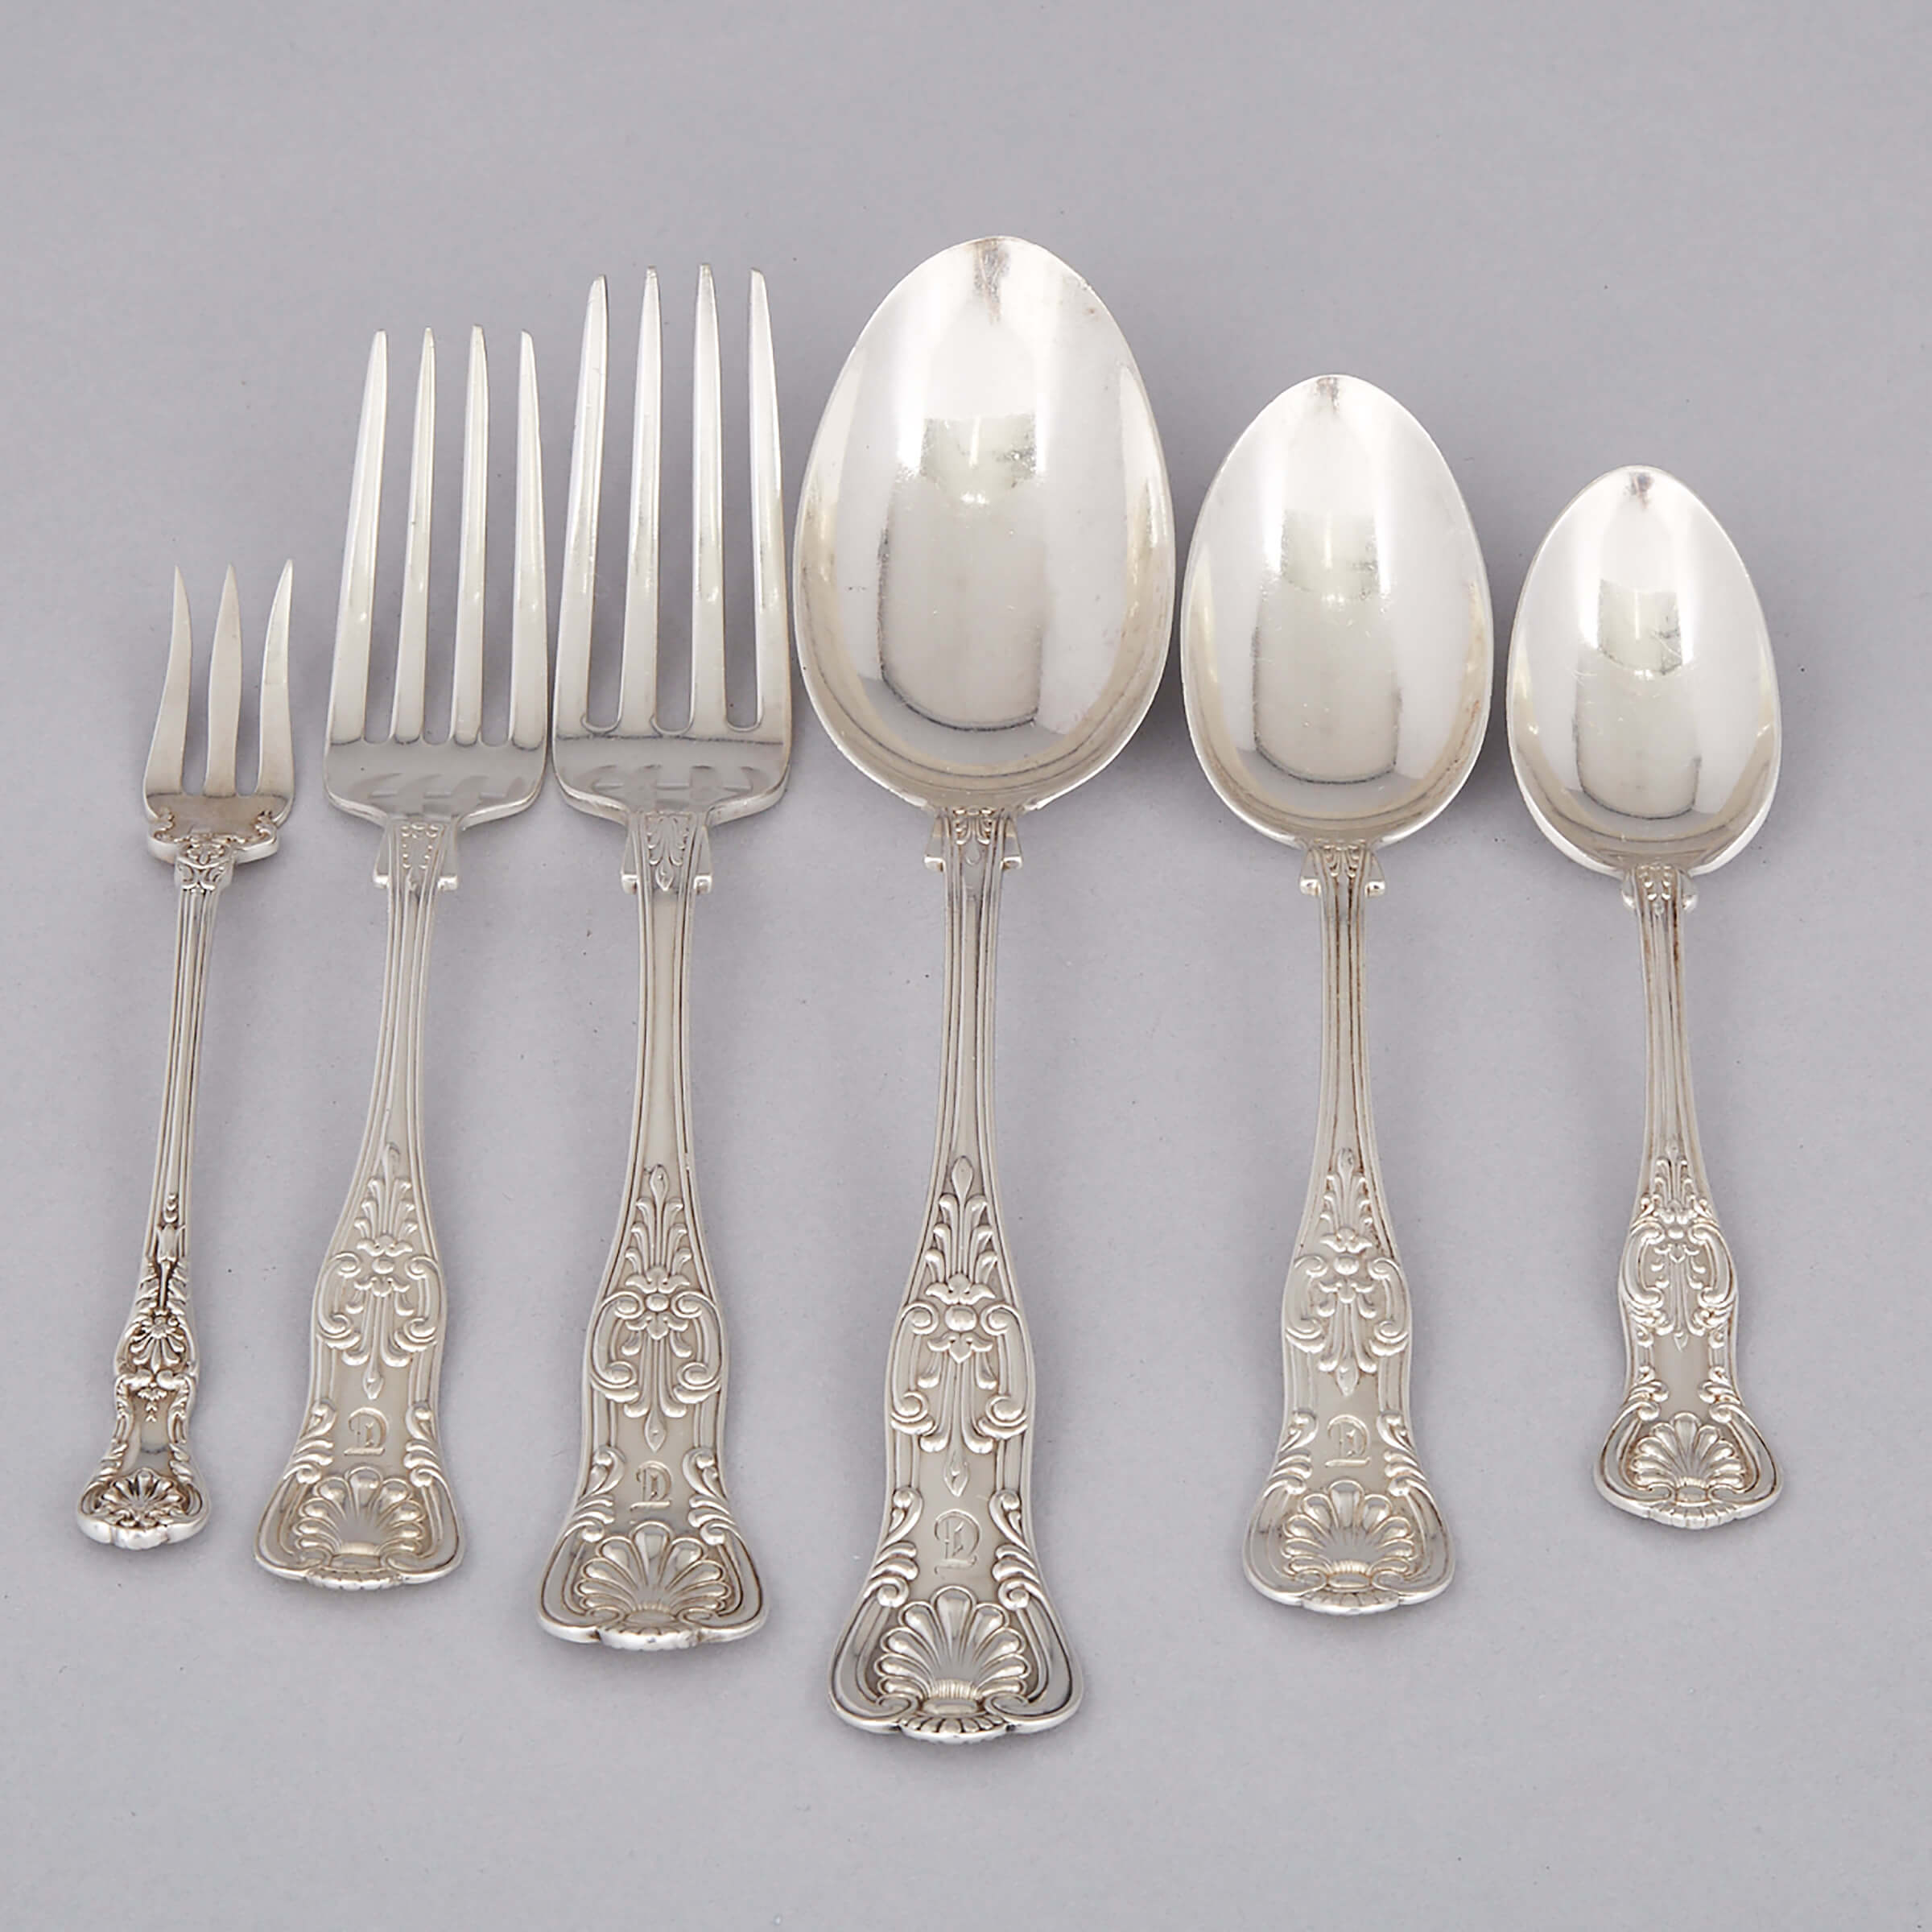 Assembled North American Silver ‘Queens’ and ‘King George’ Pattern Flatware, mainly Gorham Mfg. Co., Providence, R.I. and R. Wallace & Sons, Wallingford, Ct., 20th century